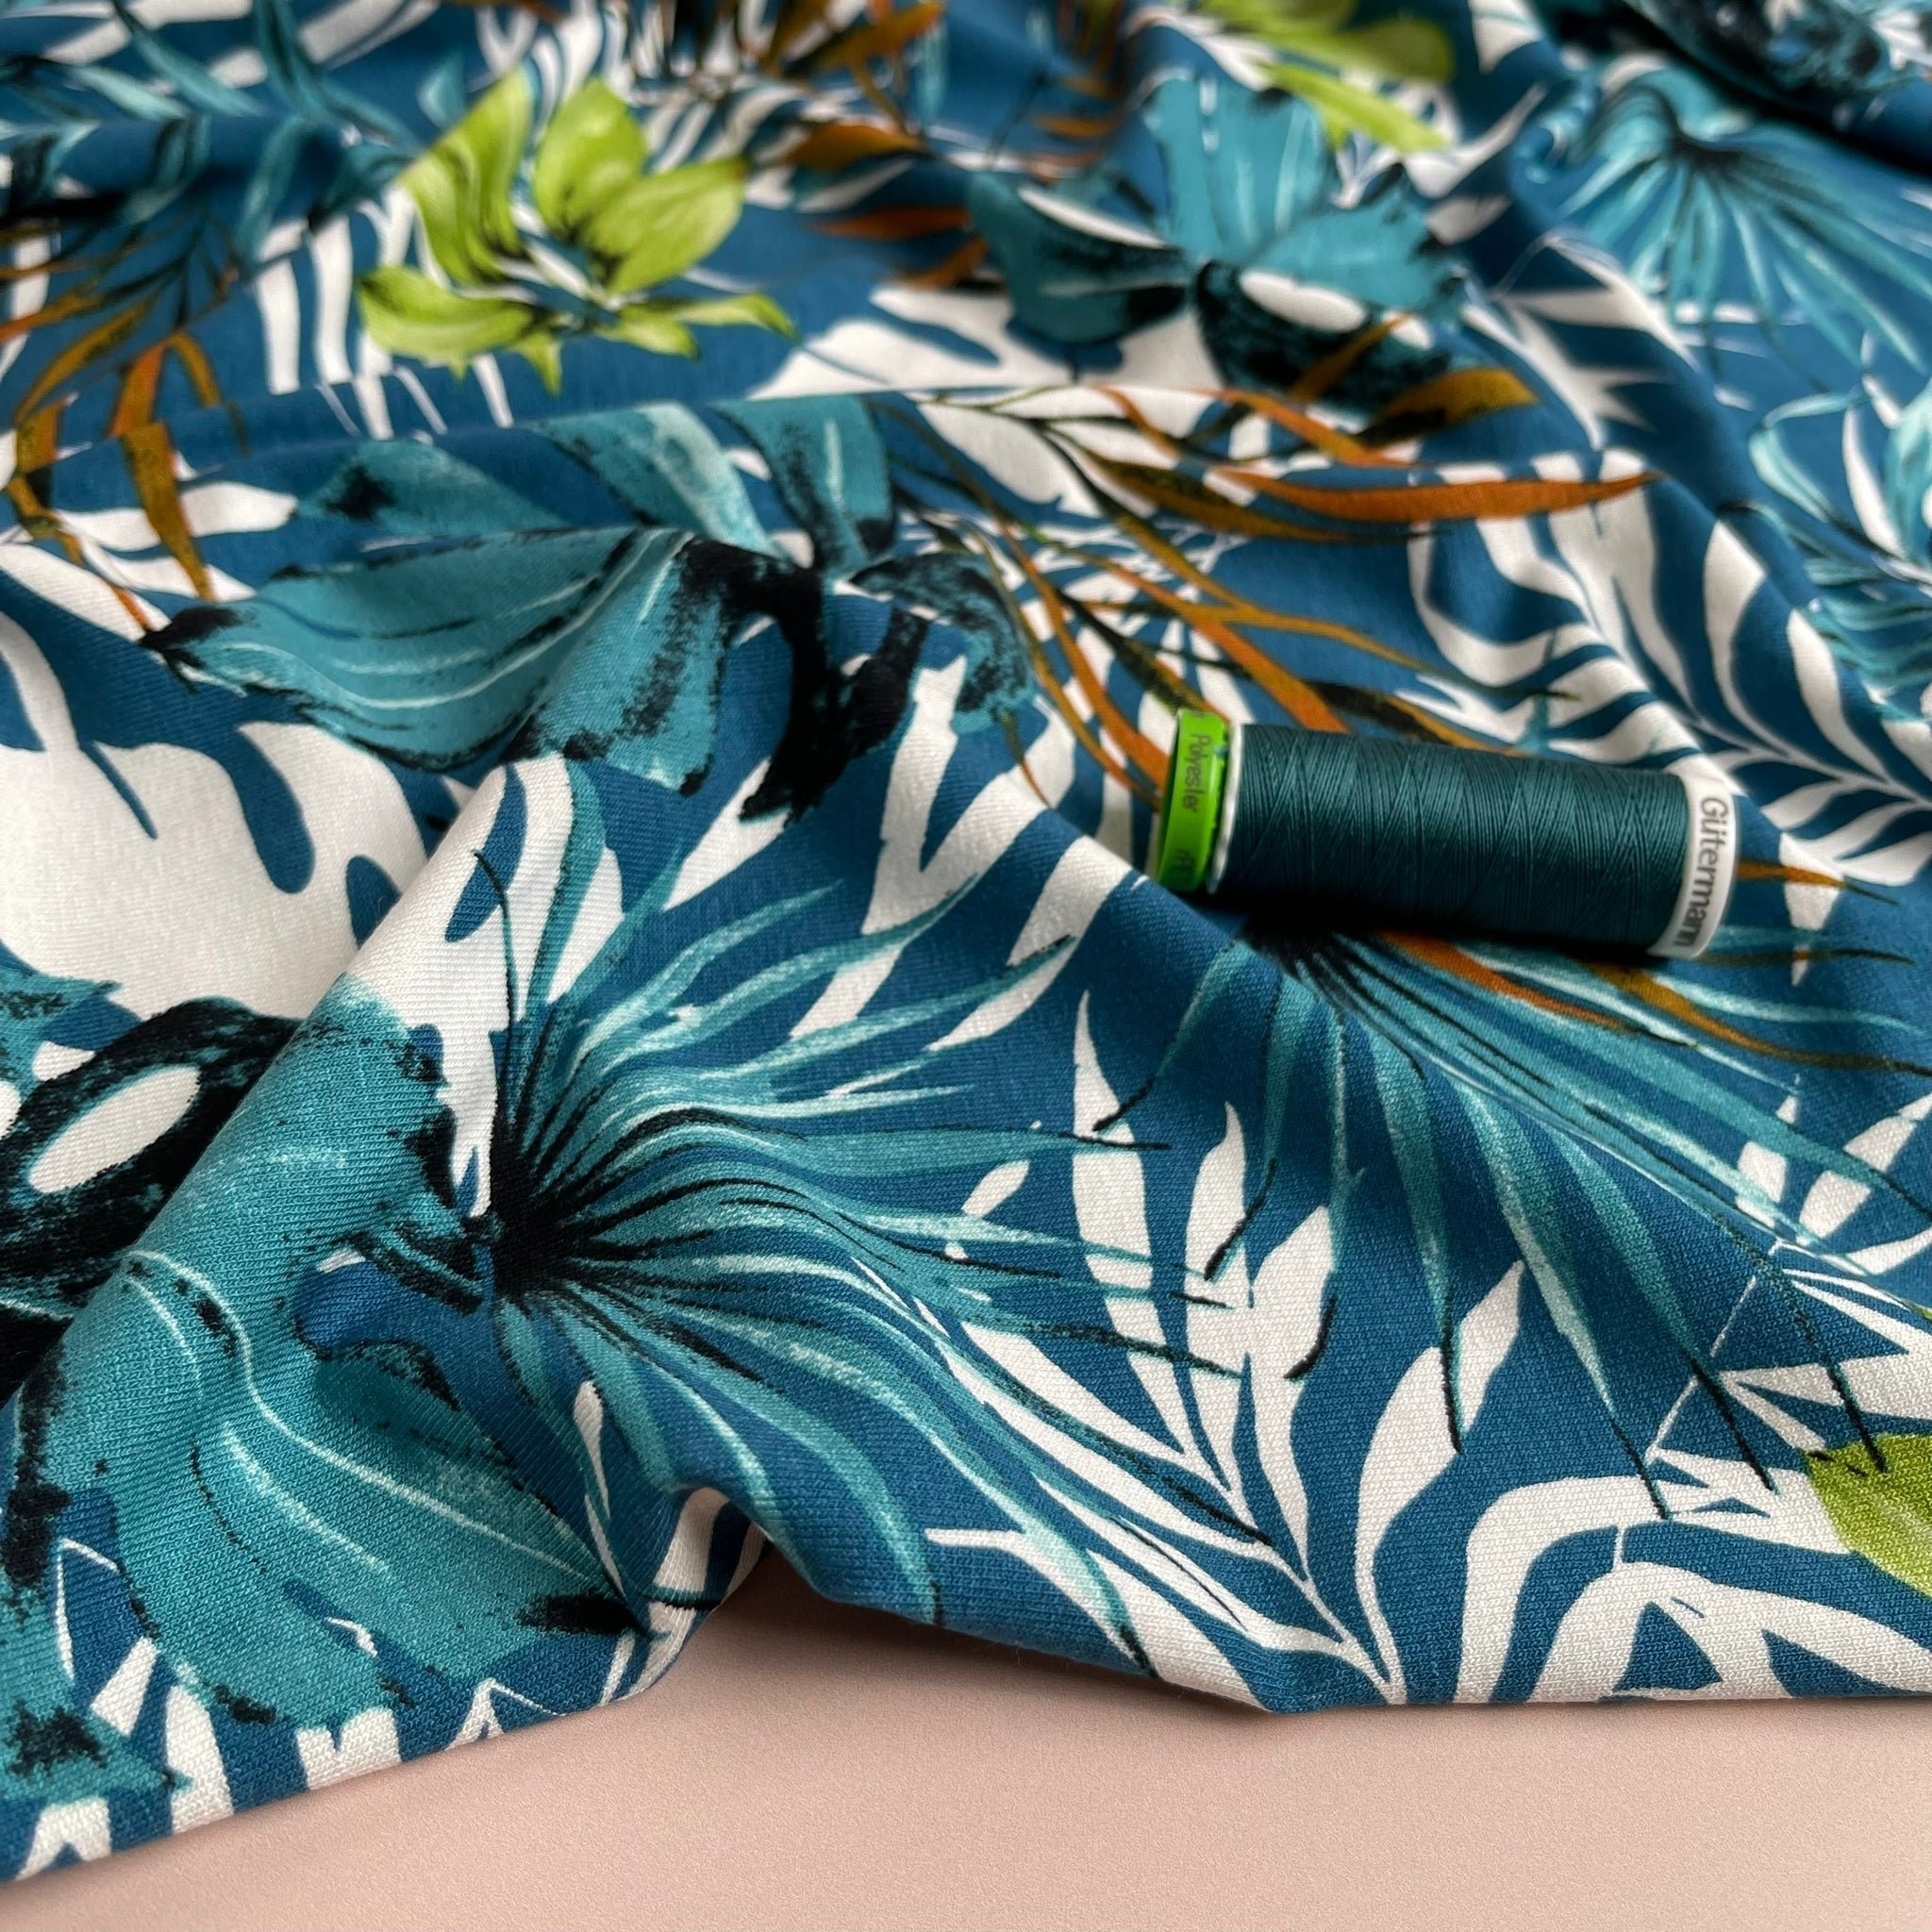 REMNANT 0.56 Metres - Tropical Leaves Viscose Jersey Fabric